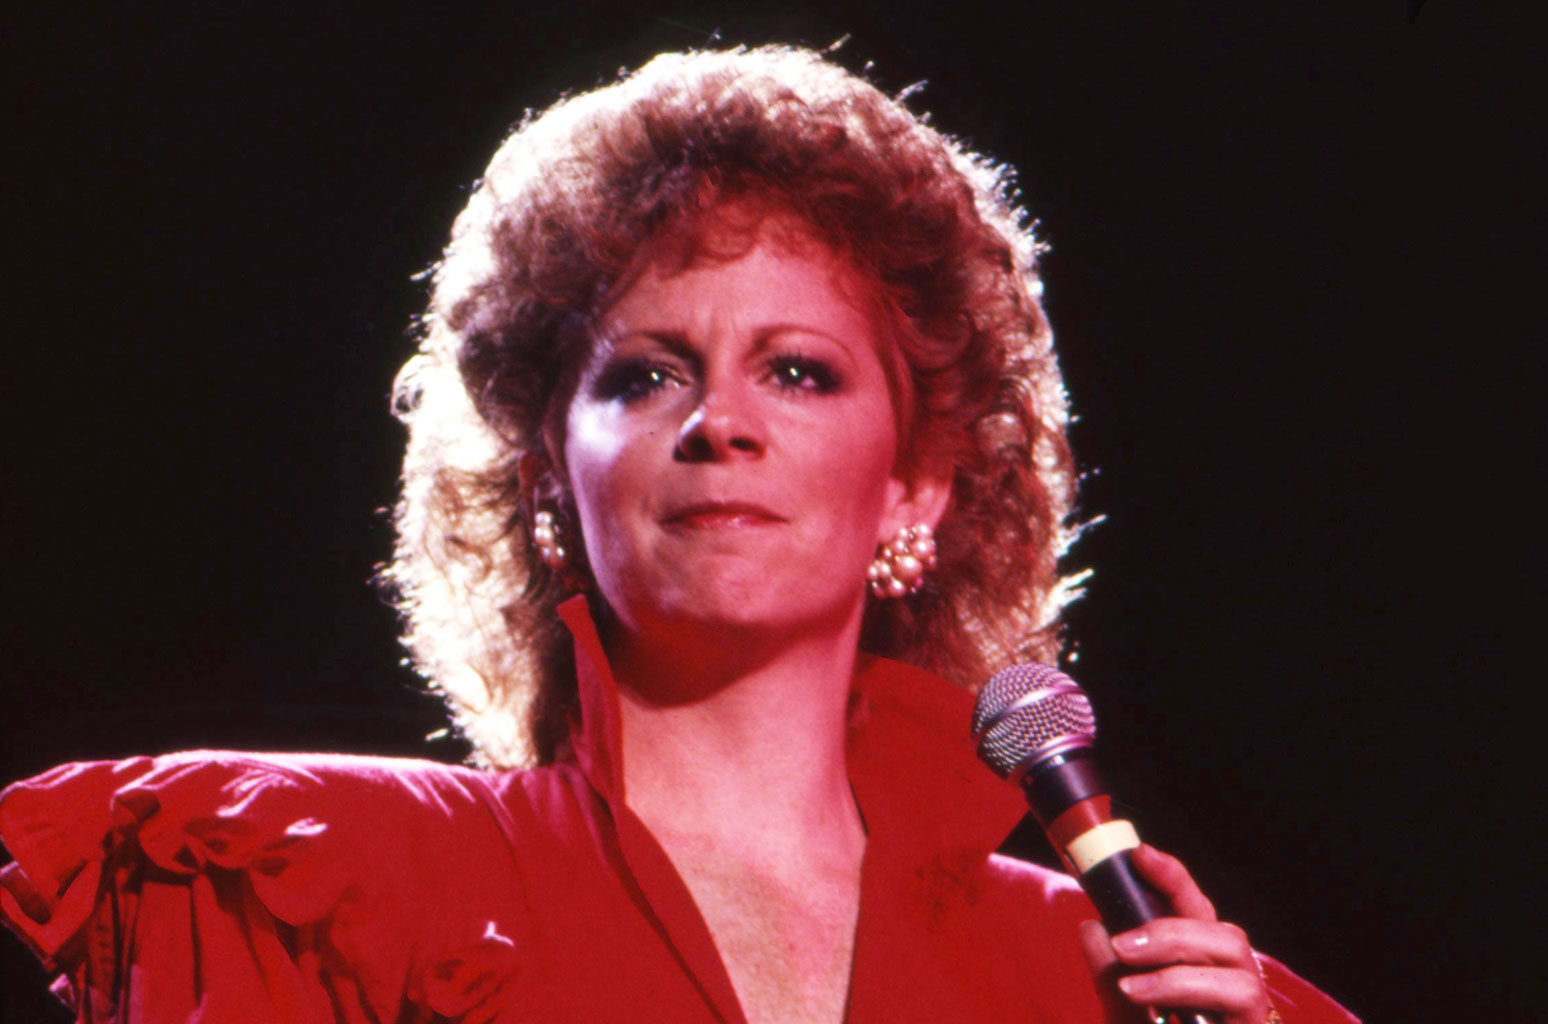 Rewinding the Country Charts: In 1983, Reba McEntire Sang 'The Blues' &amp; Scored Her First No. 1 Hit - www.billboard.com - Oklahoma